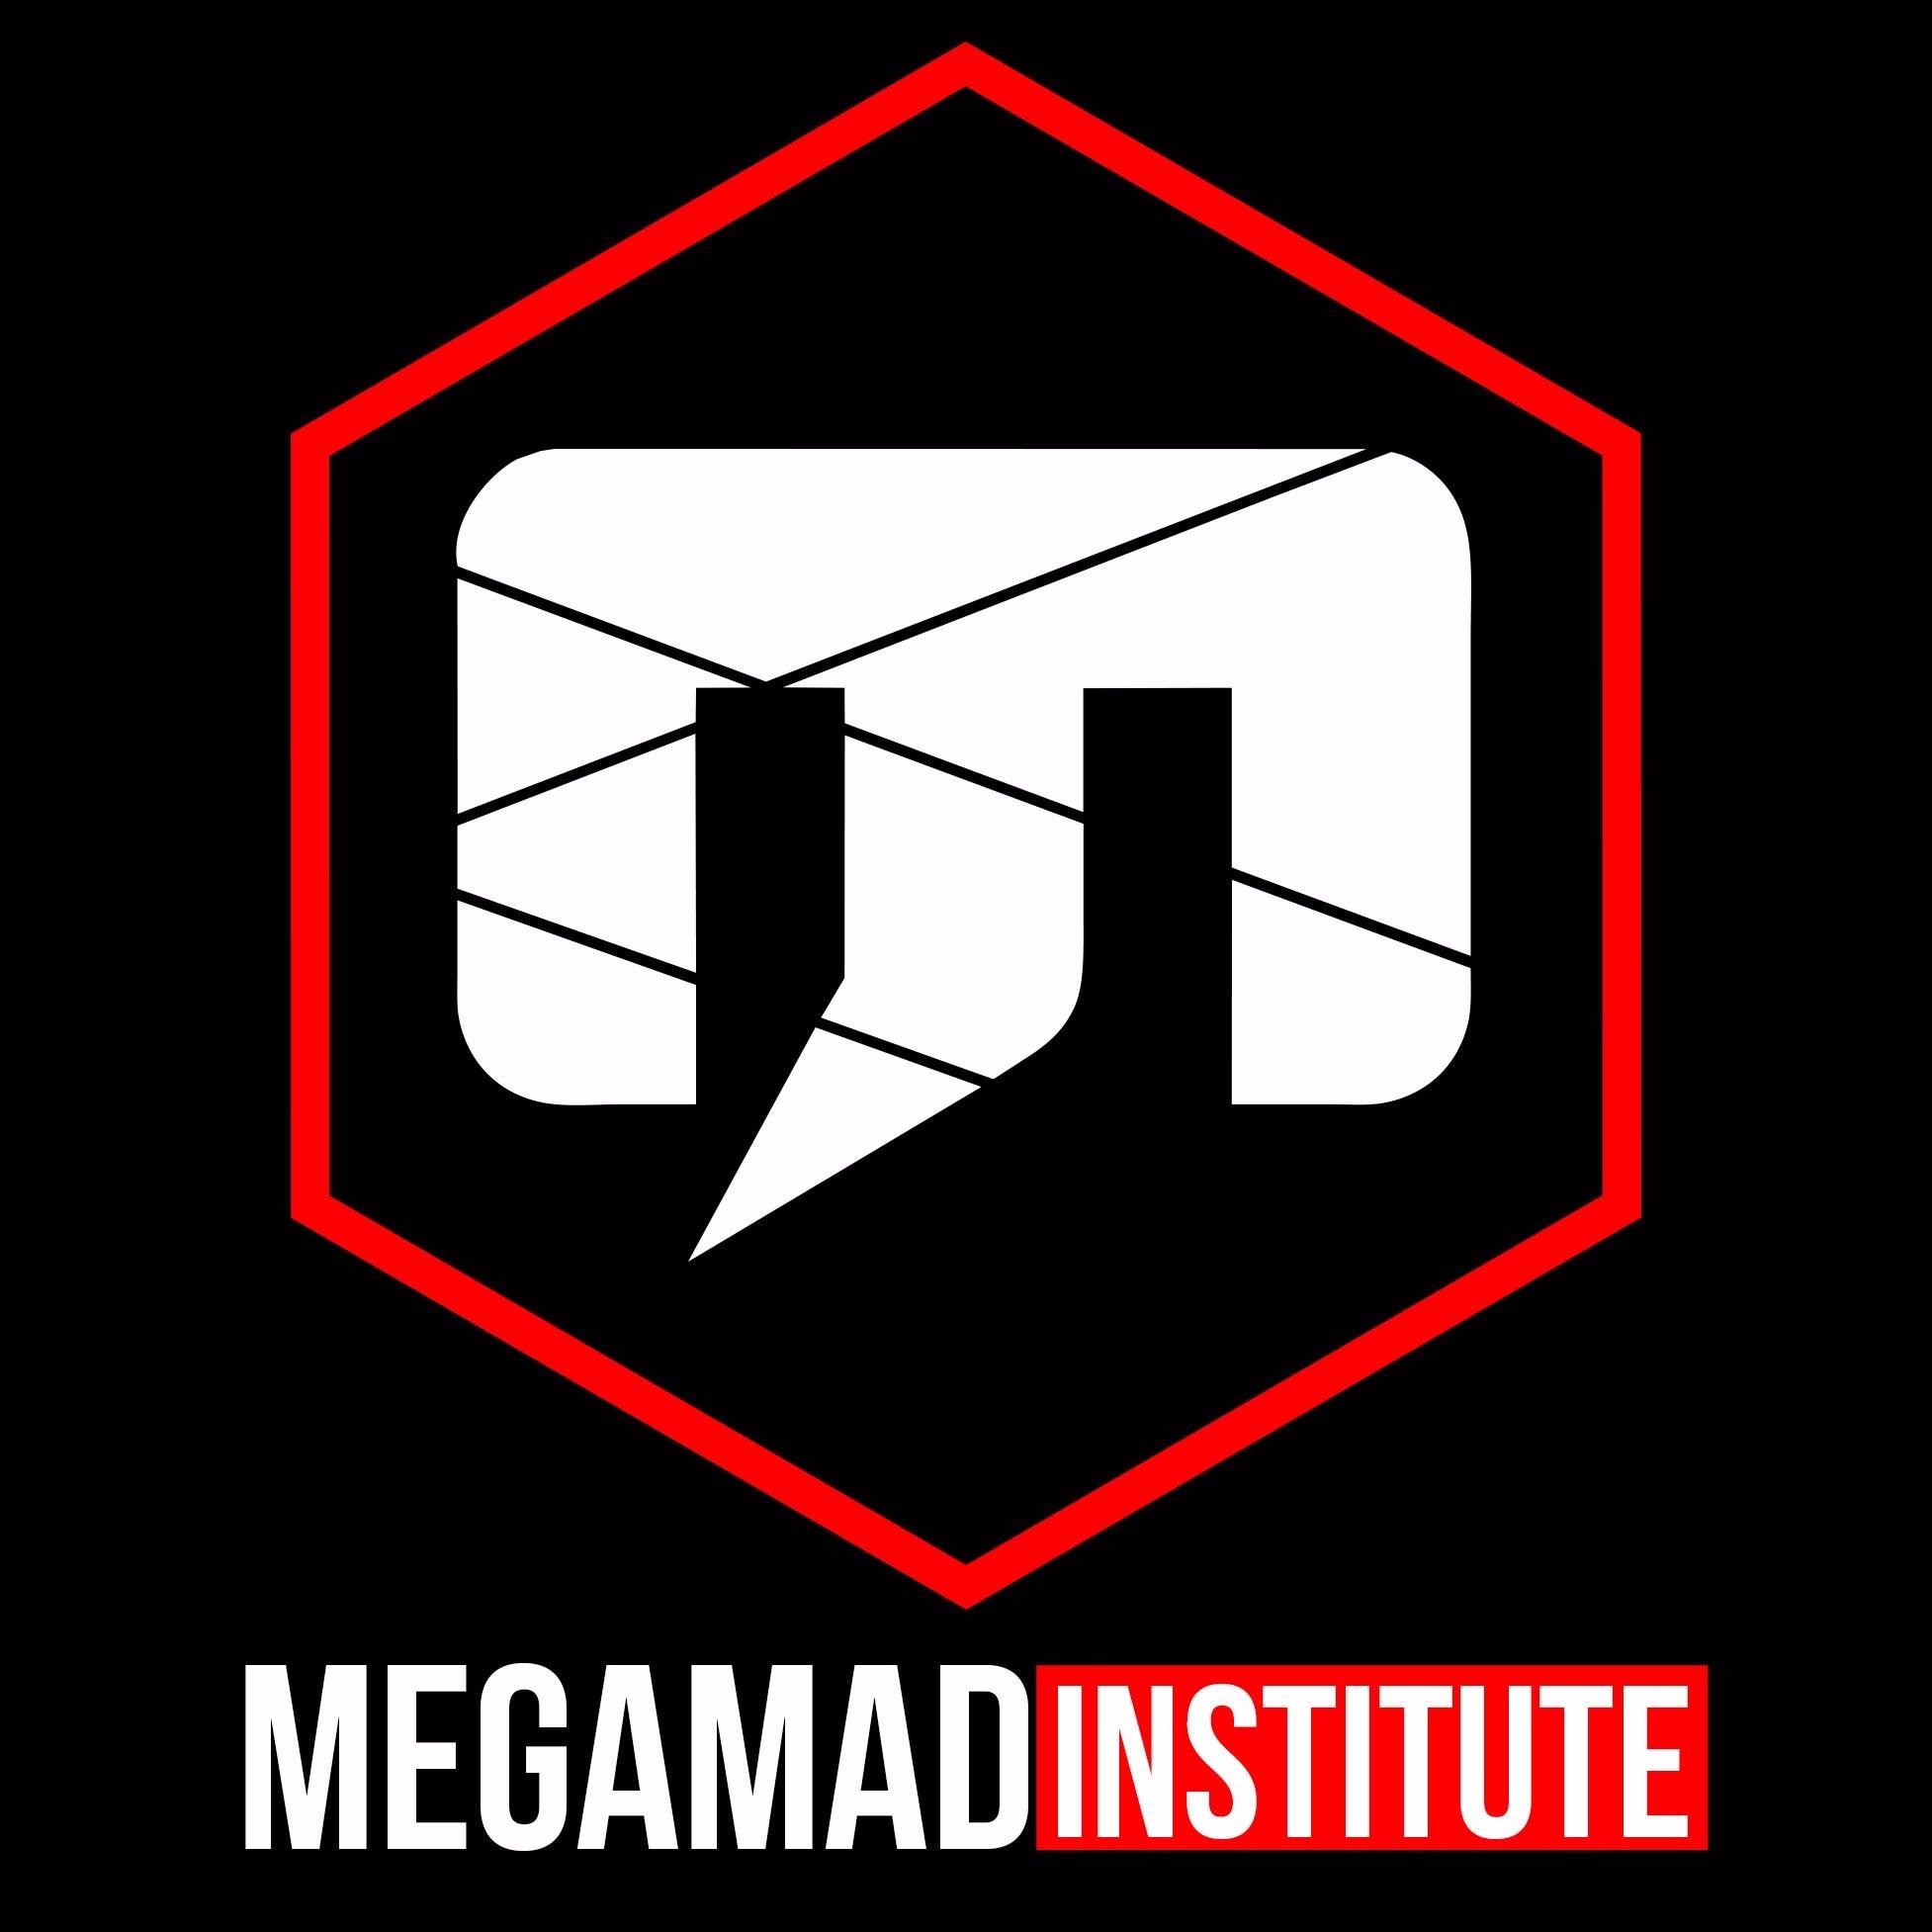 The MegaMad Institute is the go-to resource for #OnlineBusiness courses and free info. We'll get your online business growing using a straight-forward approach.